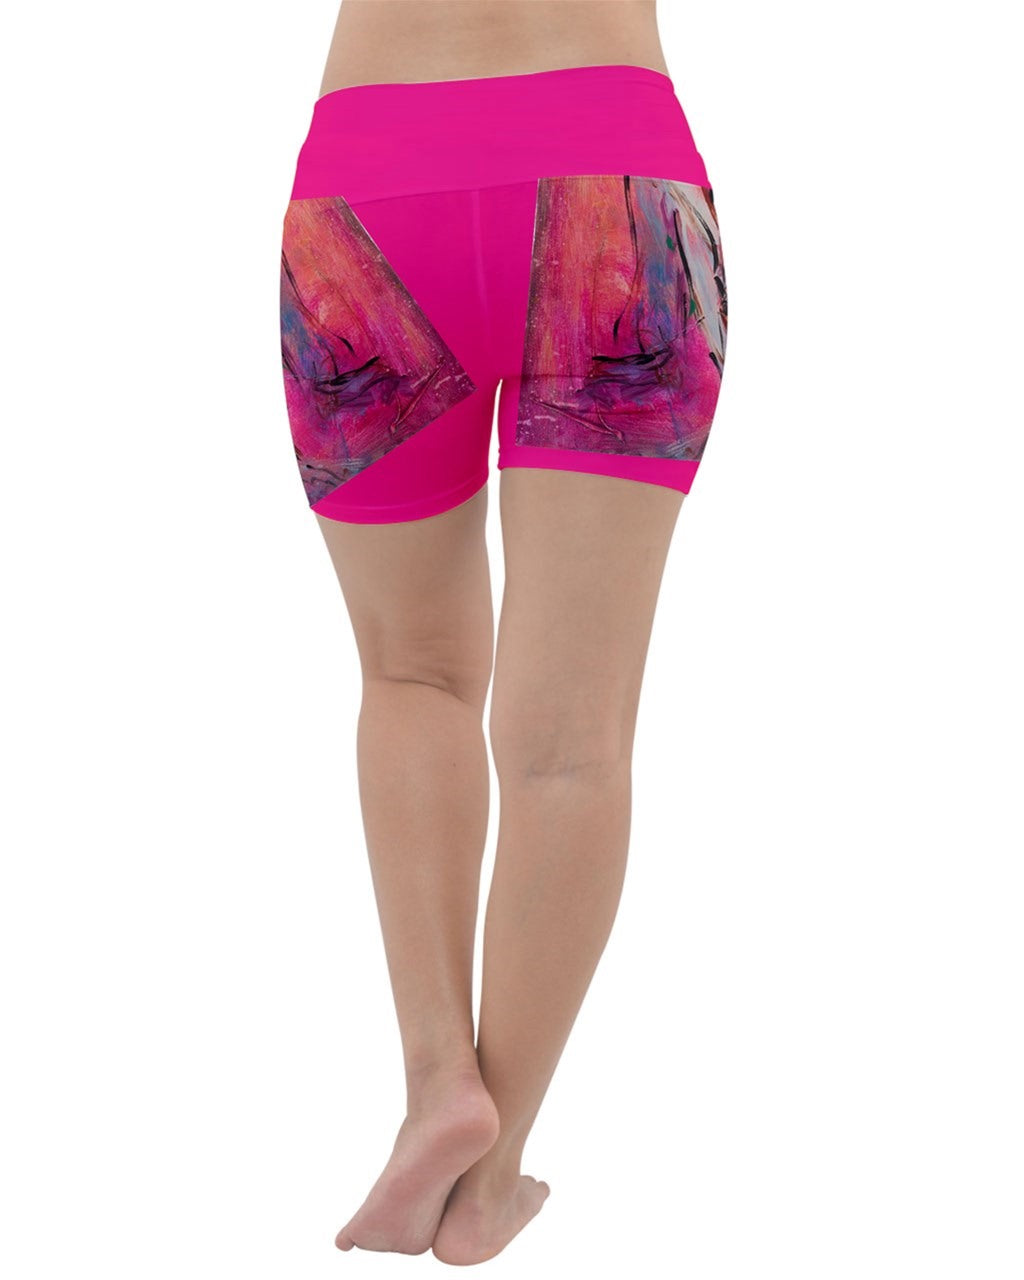 Vibrant pink leggings featuring unique art by Leeorah, showcasing a colorful array of abstract patterns and designs.Good for the yoga studio, dance floor or everyday wear. Back View